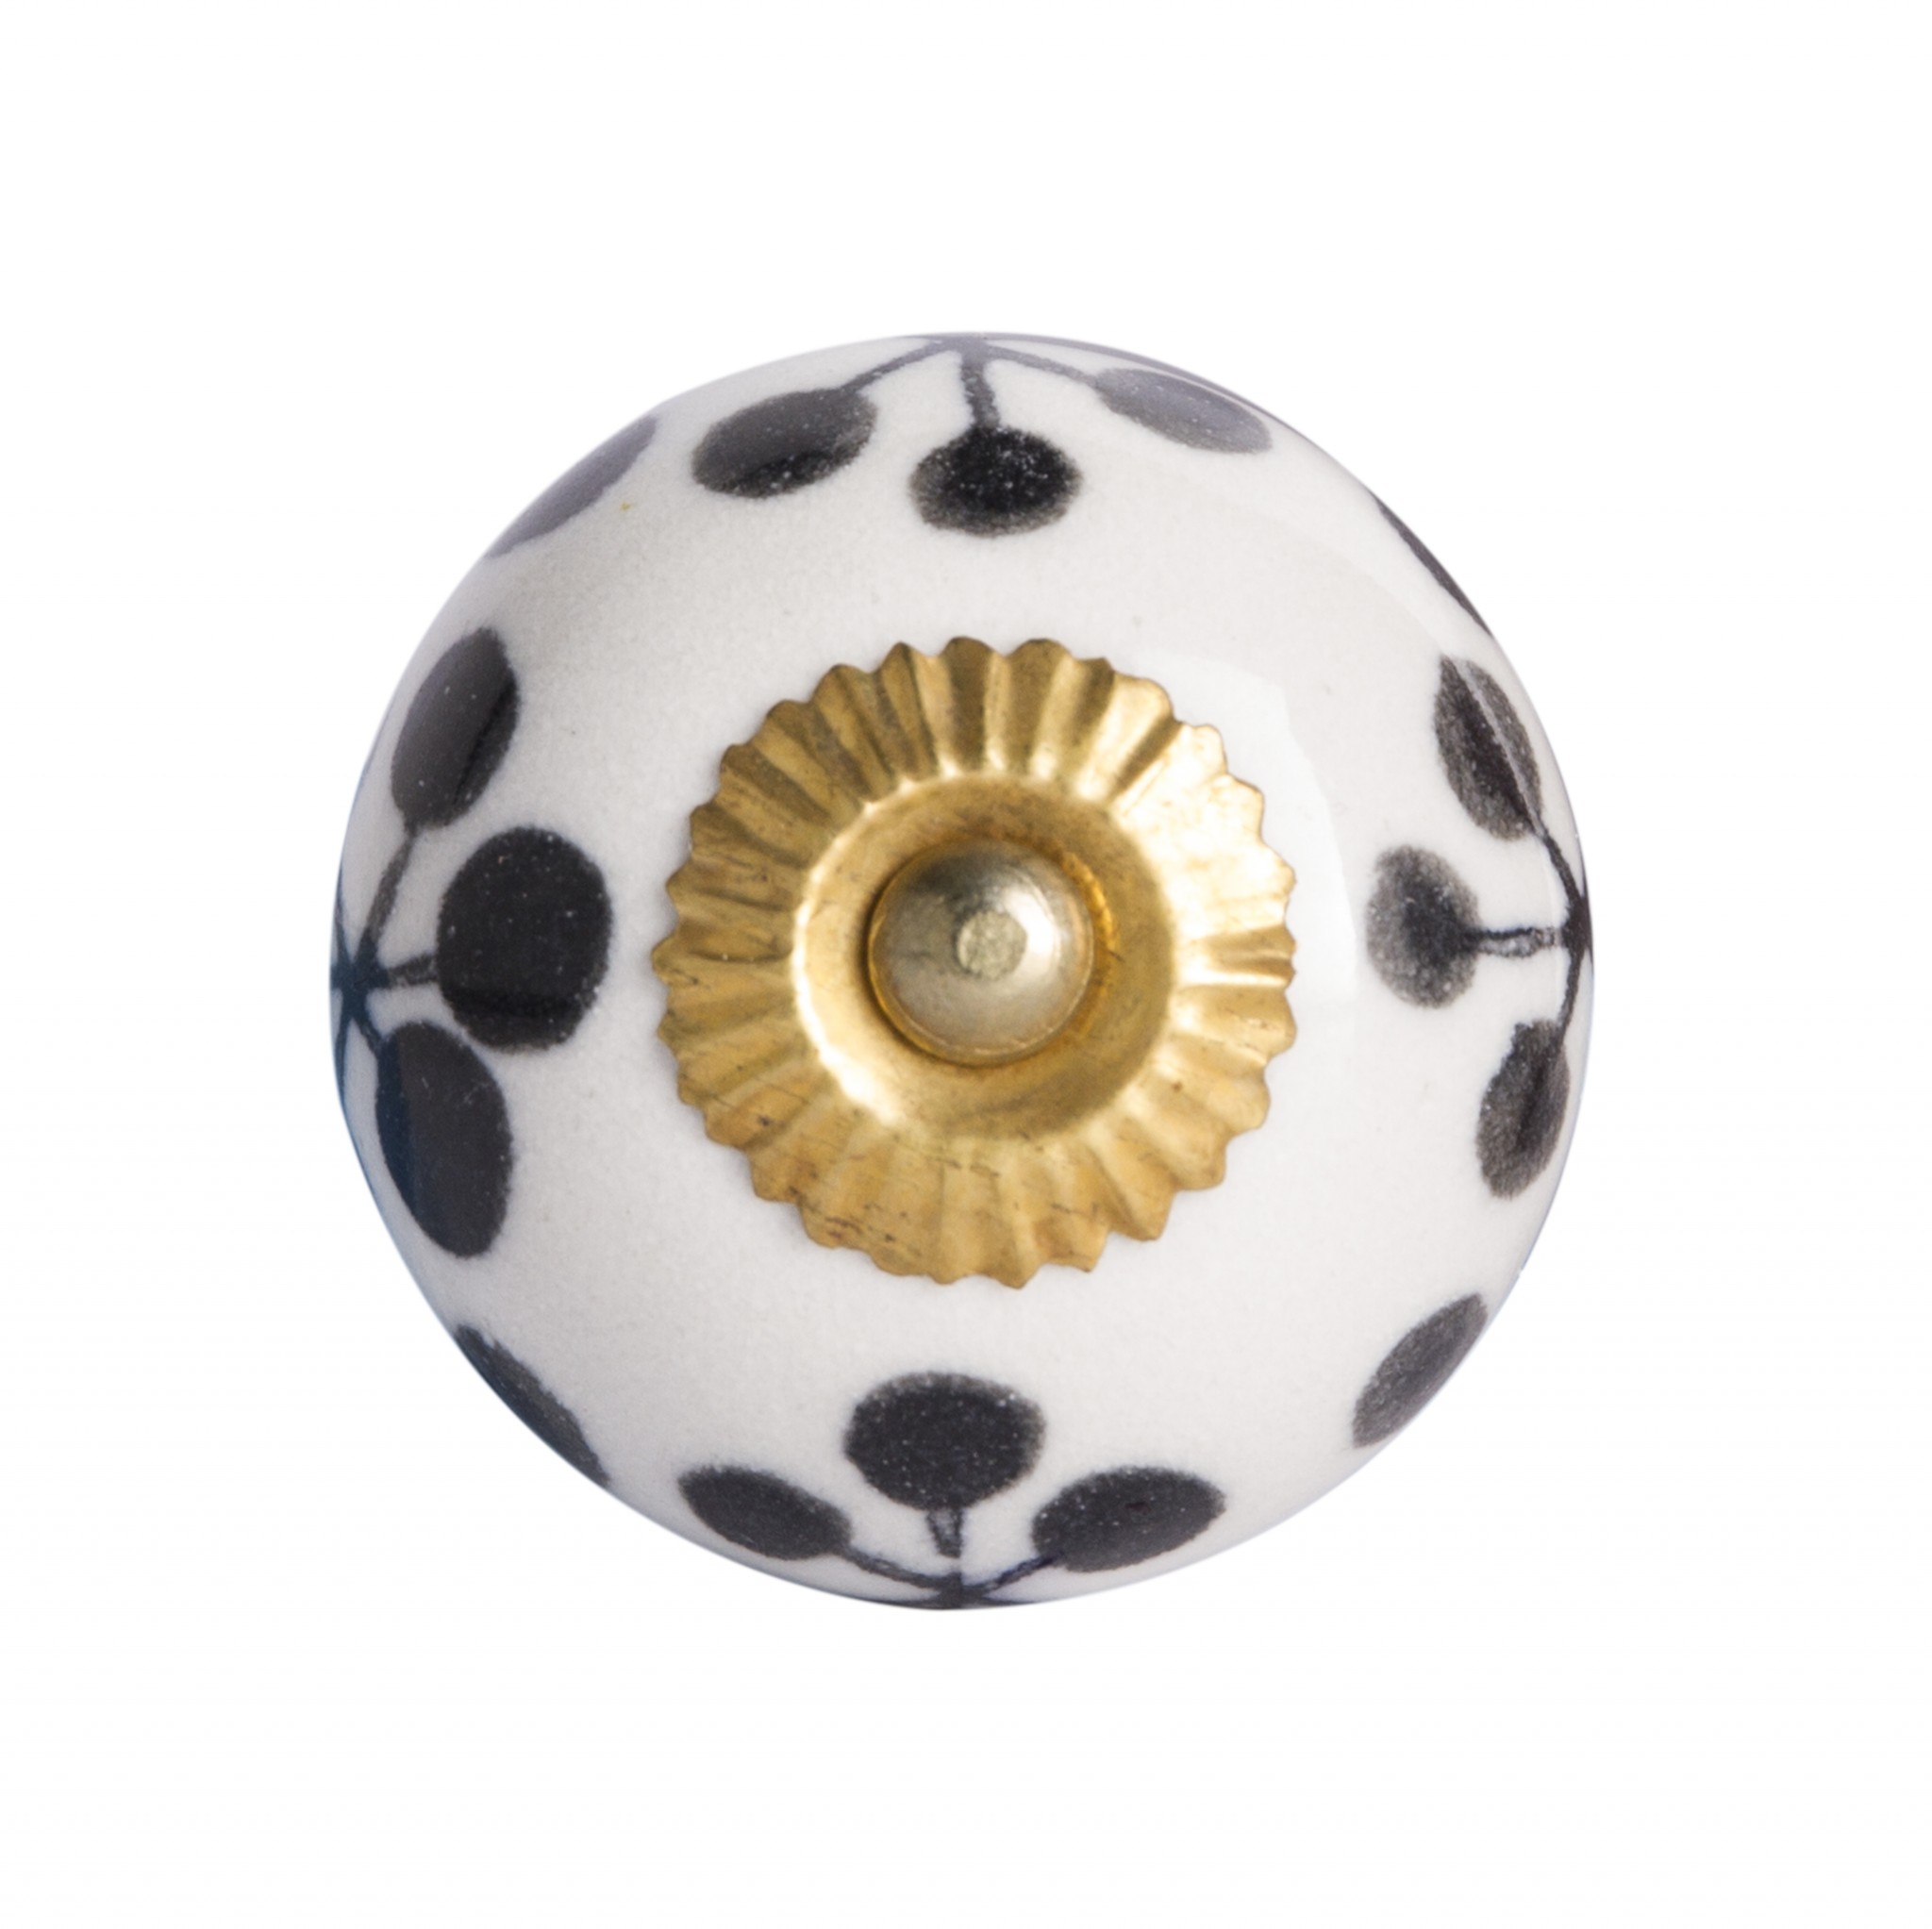 1.5" x 1.5" x 1.5" White, Black and Yellow - Knobs 12-Pack